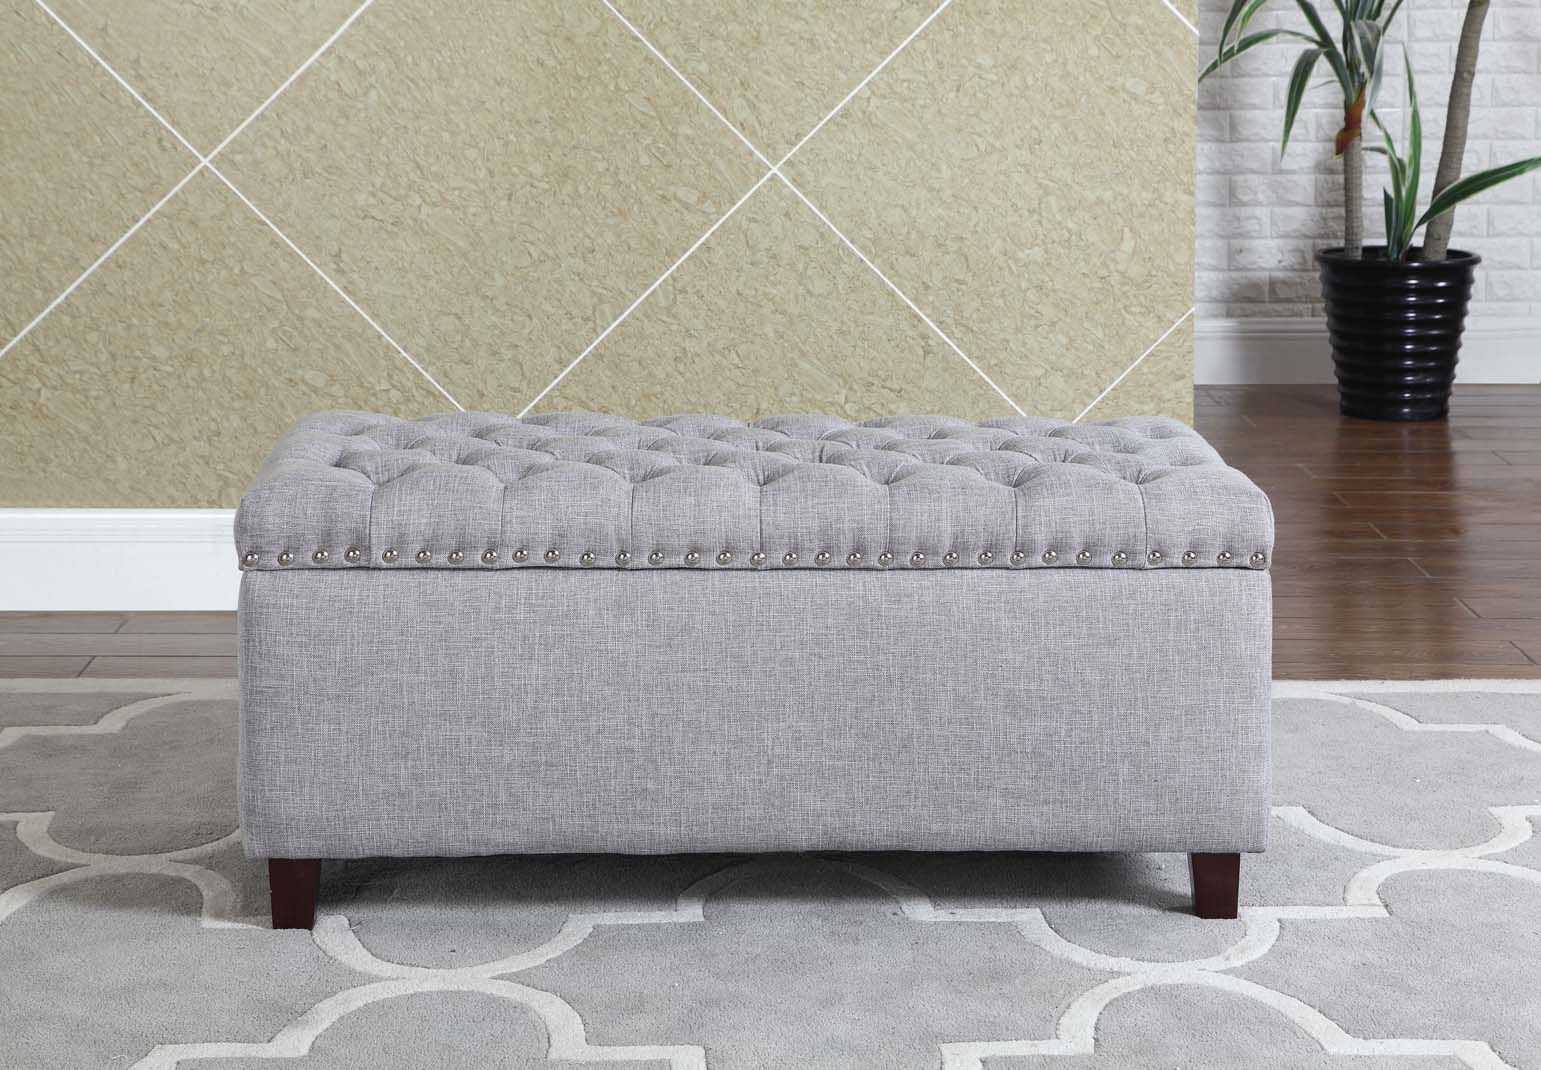 Button Tufted Storage Ottoman With Nailhead, Gray Color – Walmart With Brown And Gray Button Tufted Ottomans (View 10 of 20)